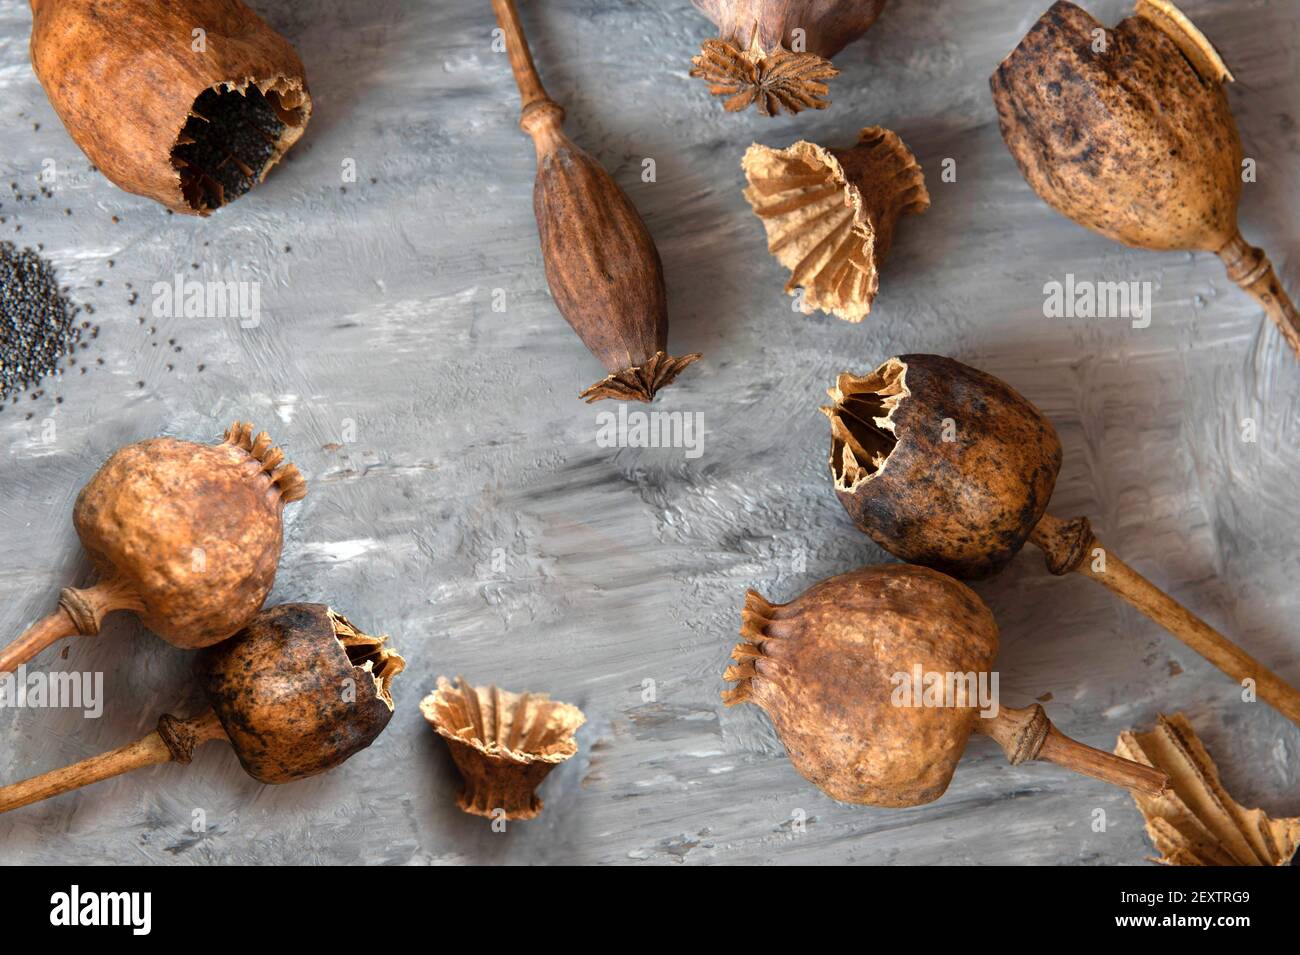 Homemade grown poppy heads, opened head and spilled poppy seeds. Stock Photo